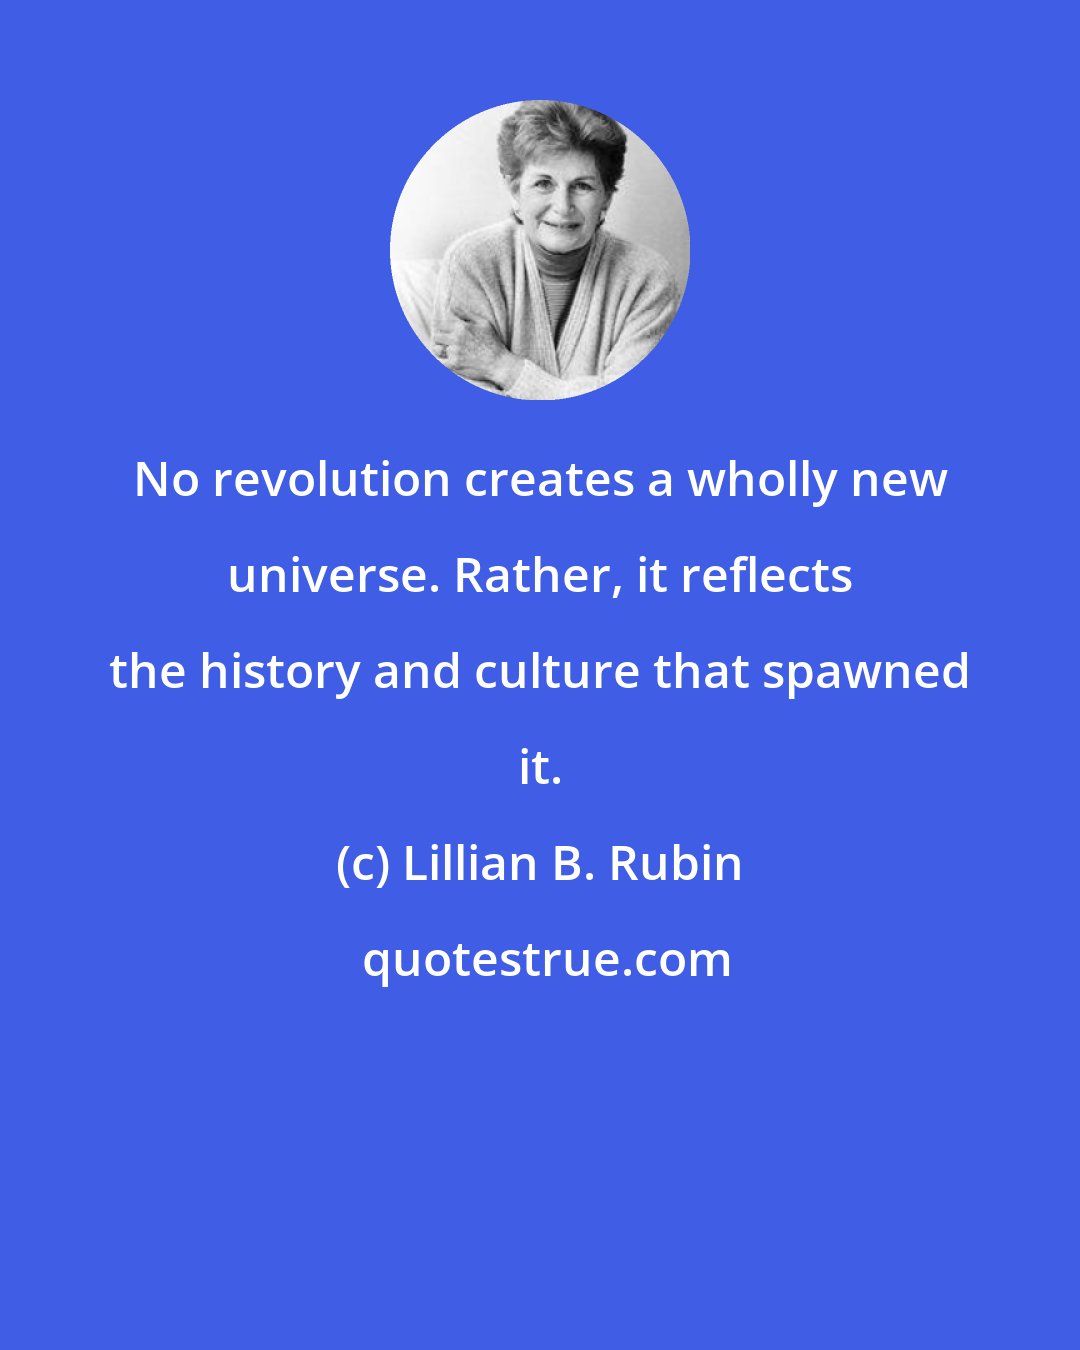 Lillian B. Rubin: No revolution creates a wholly new universe. Rather, it reflects the history and culture that spawned it.